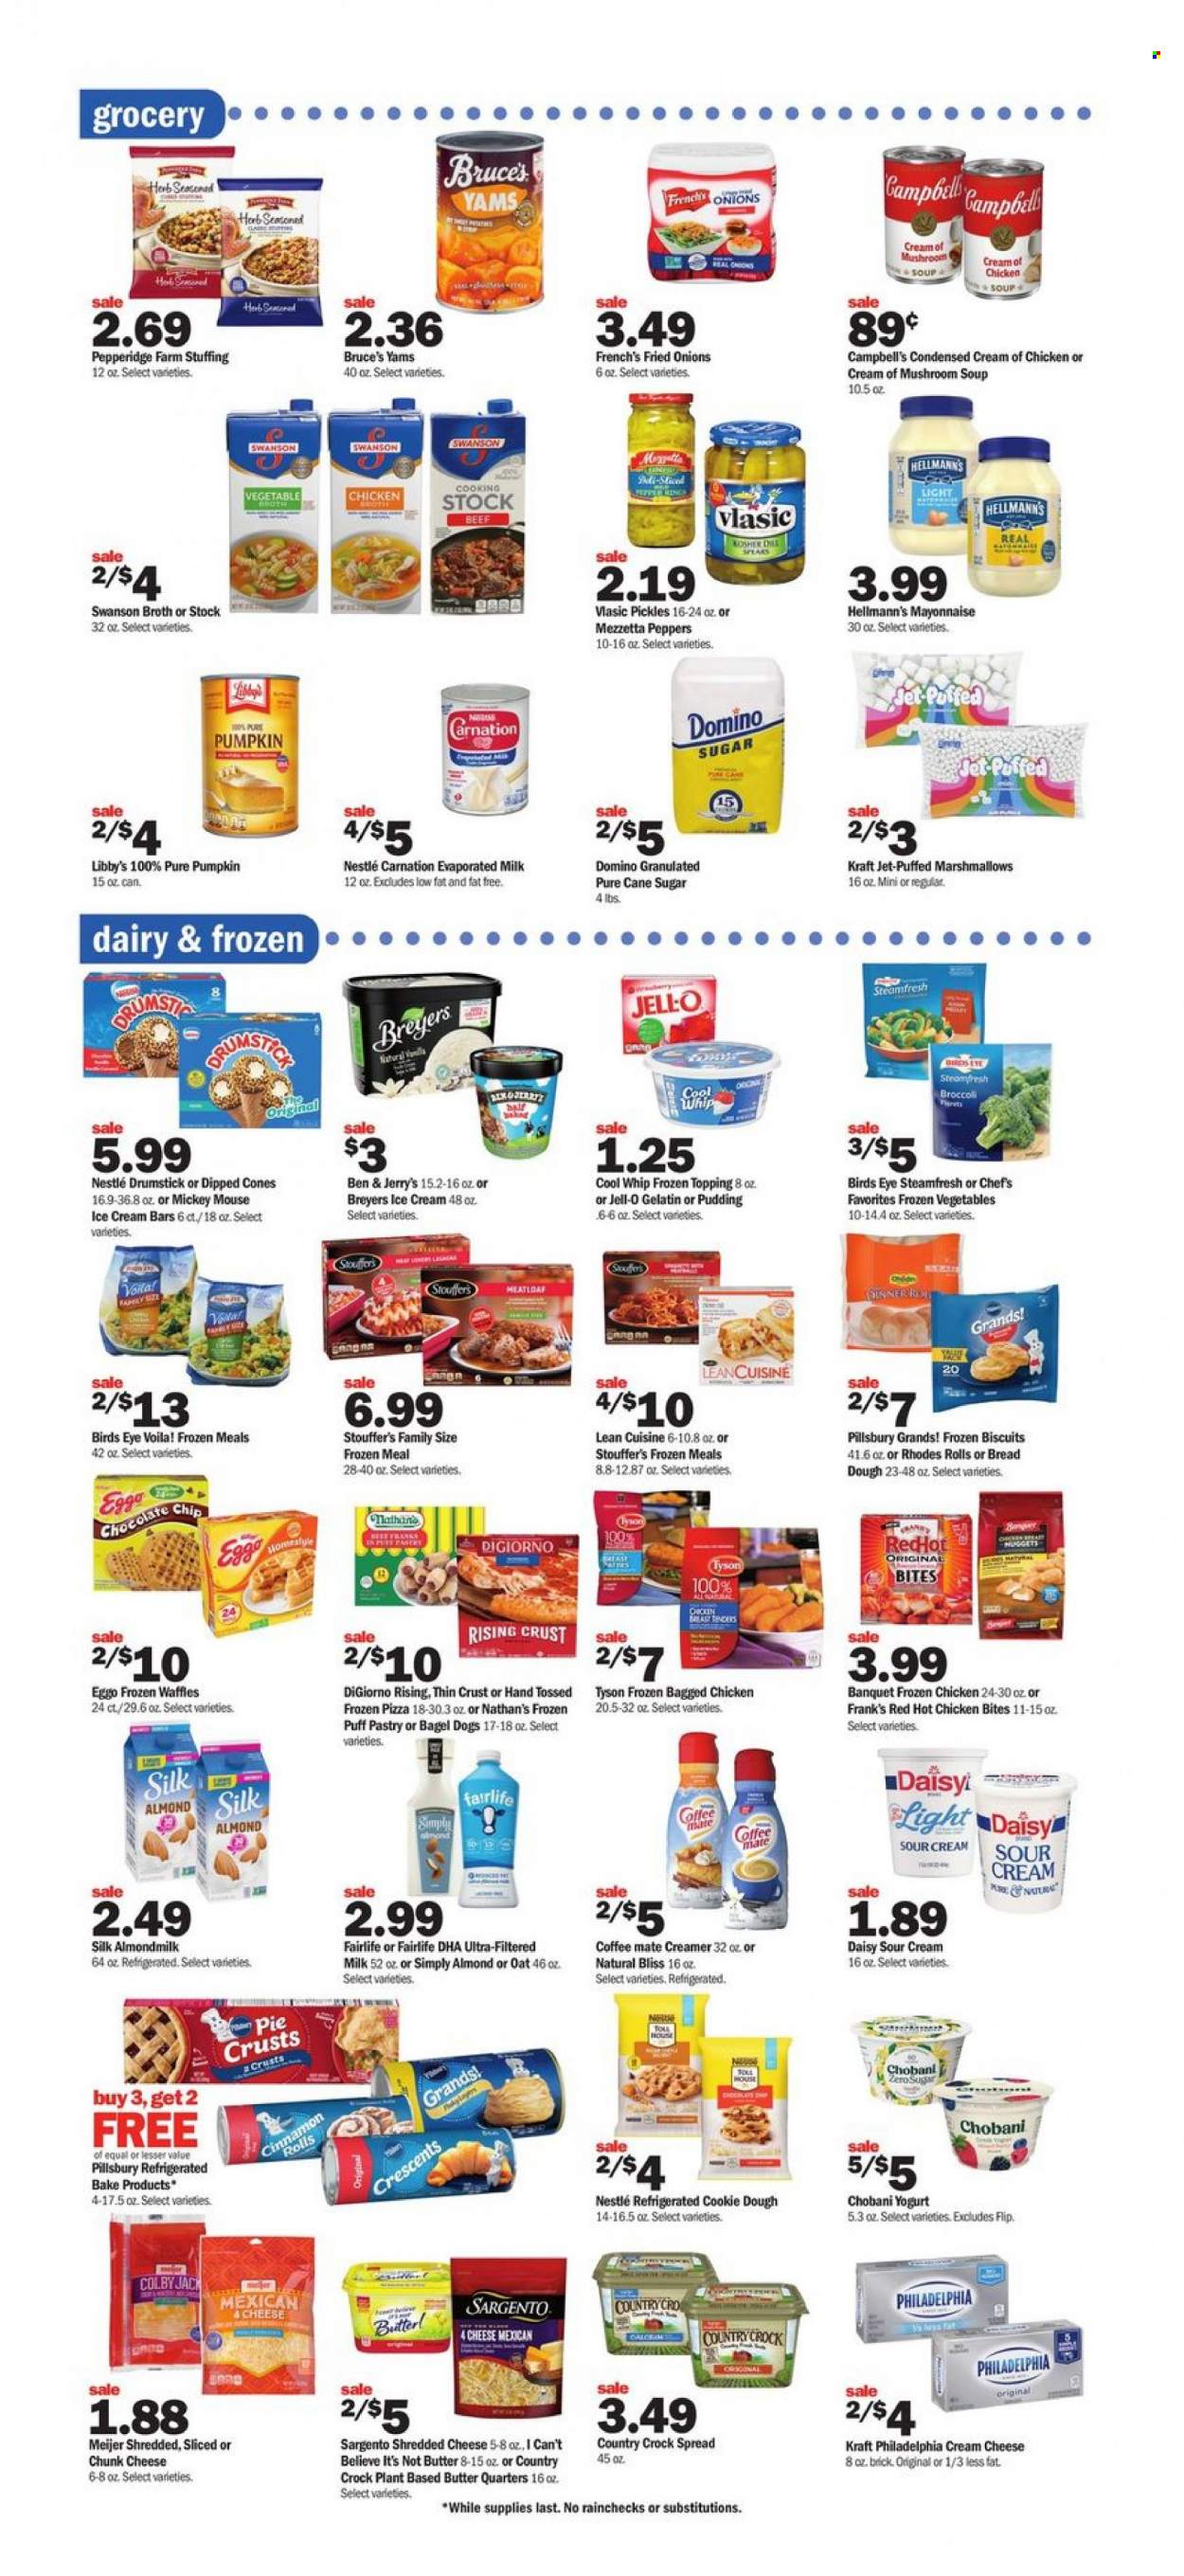 thumbnail - Meijer Flyer - 11/21/2021 - 11/27/2021 - Sales products - bread, pie, cinnamon roll, waffles, broccoli, pumpkin, peppers, Campbell's, mushroom soup, pizza, chicken soup, soup, nuggets, Pillsbury, Bird's Eye, Lean Cuisine, bagel dogs, Kraft®, Colby cheese, shredded cheese, Philadelphia, chunk cheese, Sargento, pudding, yoghurt, Chobani, almond milk, Coffee-Mate, evaporated milk, Silk, butter, I Can't Believe It's Not Butter, Cool Whip, sour cream, creamer, mayonnaise, Hellmann’s, bread dough, puff pastry, ice cream, ice cream bars, Mickey Mouse, Ben & Jerry's, frozen vegetables, chicken bites, Stouffer's, cookie dough, marshmallows, Nestlé, biscuit, cane sugar, sugar, pie crust, topping, Jell-O, broth, pickles, Jet, gelatin. Page 4.